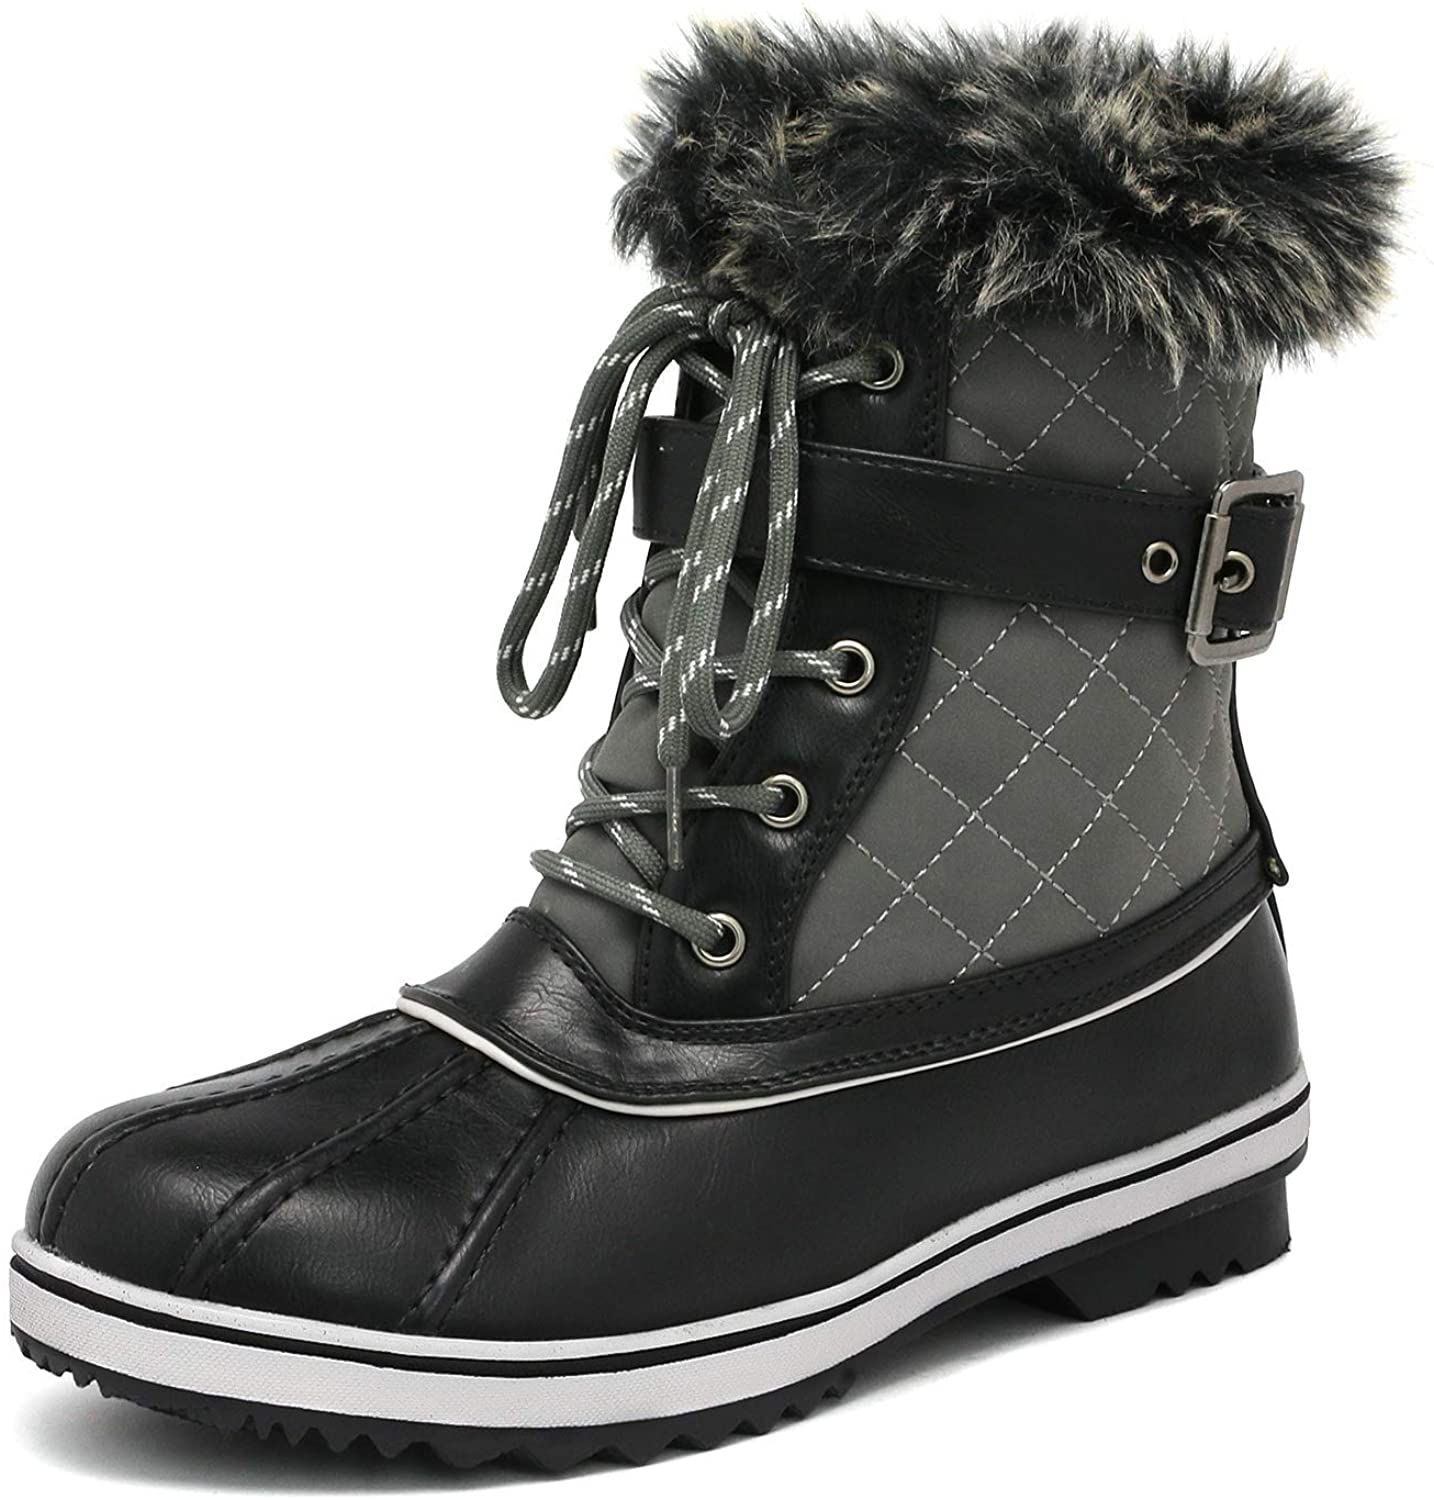 DREAM PAIRS Insulated Mid-Calf Snow Boots